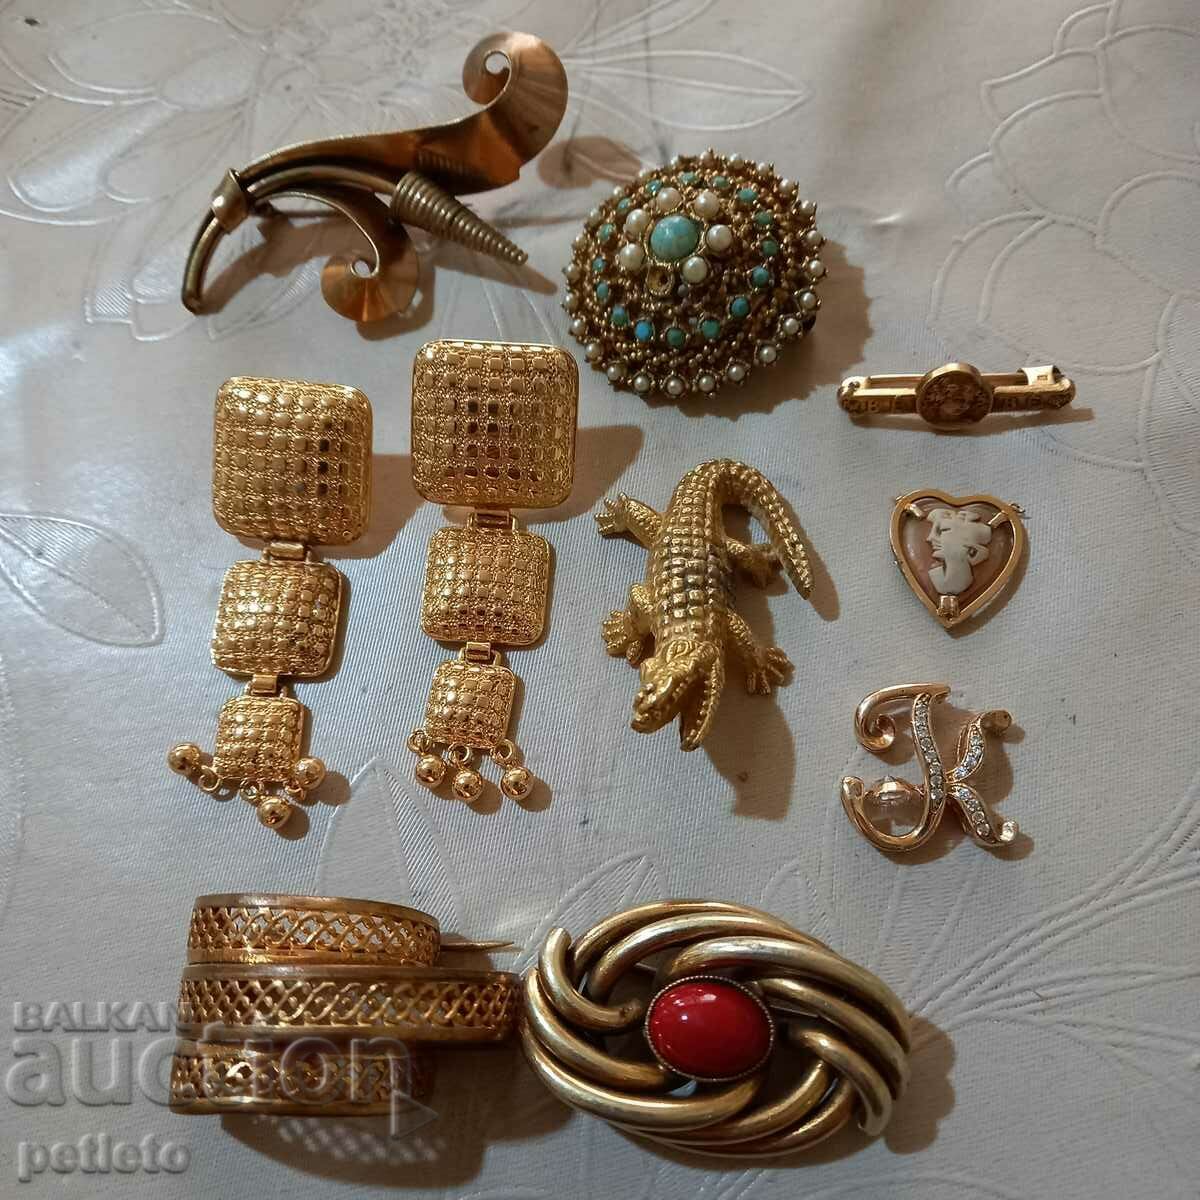 Old jewelry.